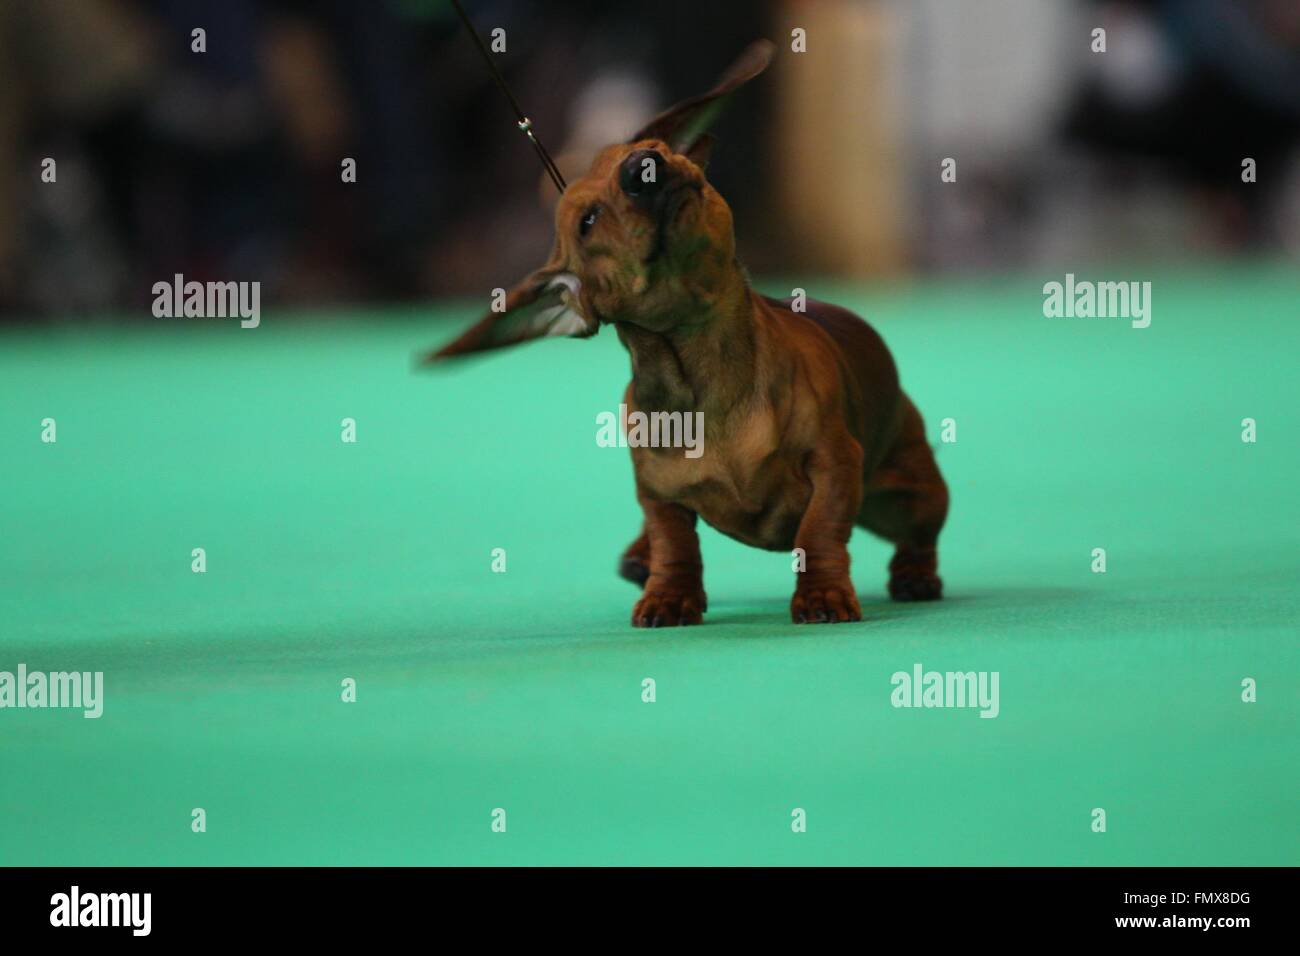 Birmingham, UK. 13 March 2016. A Miniature Smooth-haired Dachshund being judged on the final day at Crufts which celebrates its 125th Anniversary this year. Credit:  Jon Freeman/Alamy Live News Stock Photo